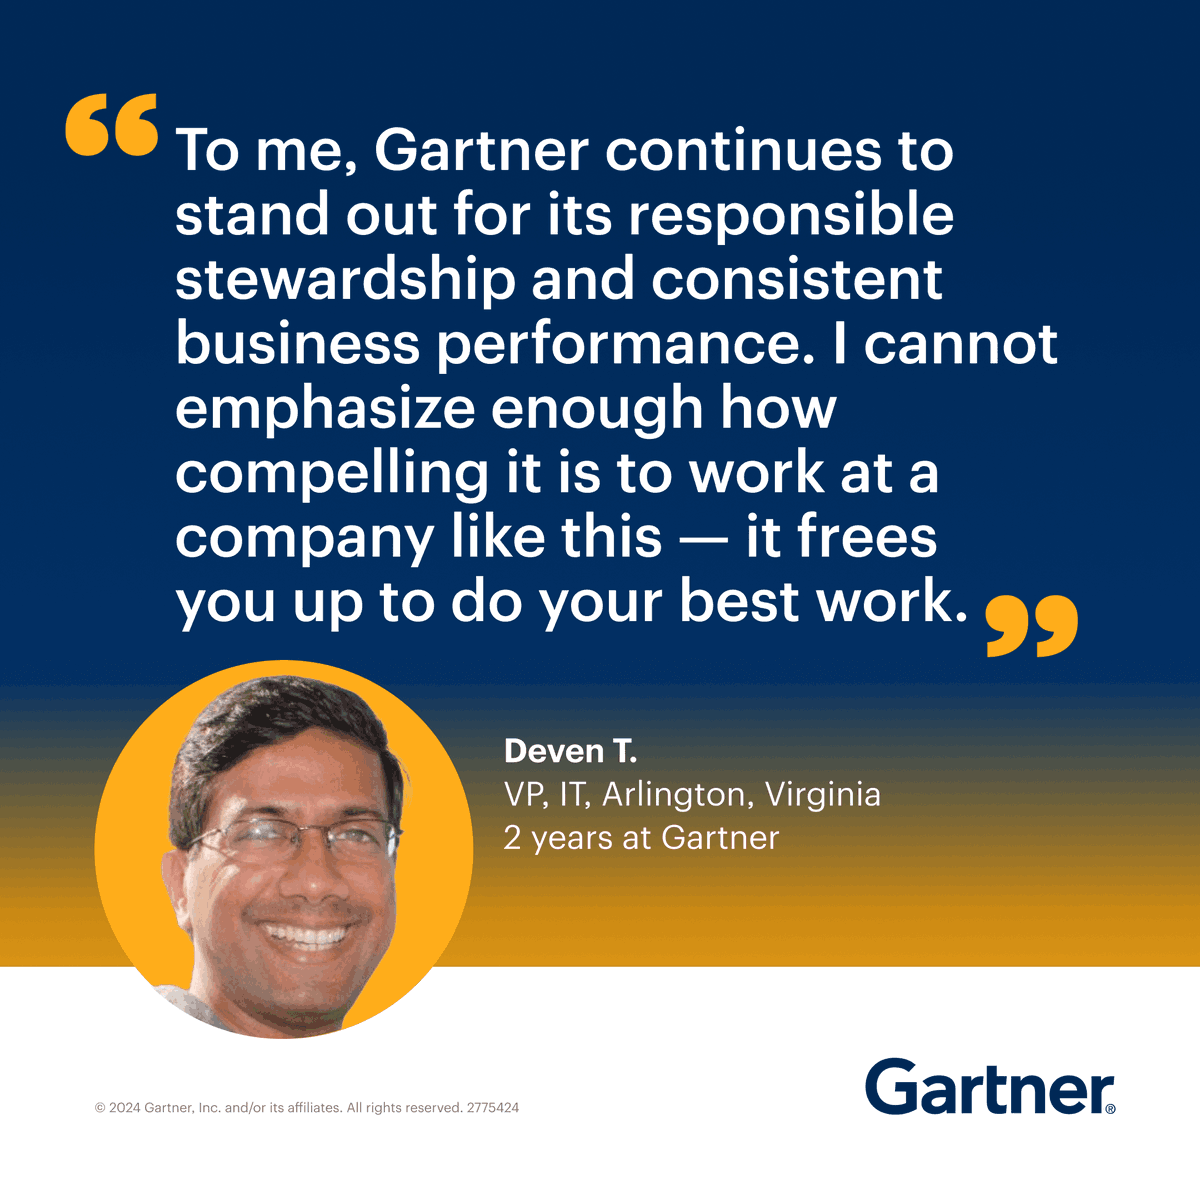 When you work with the best, you can do big things. At Gartner, we ensure our associates experience the best work culture. To join us, explore open opportunities here: gtnr.it/3WJ7SKm #LifeAtGartner #WorkCulture #Hiring